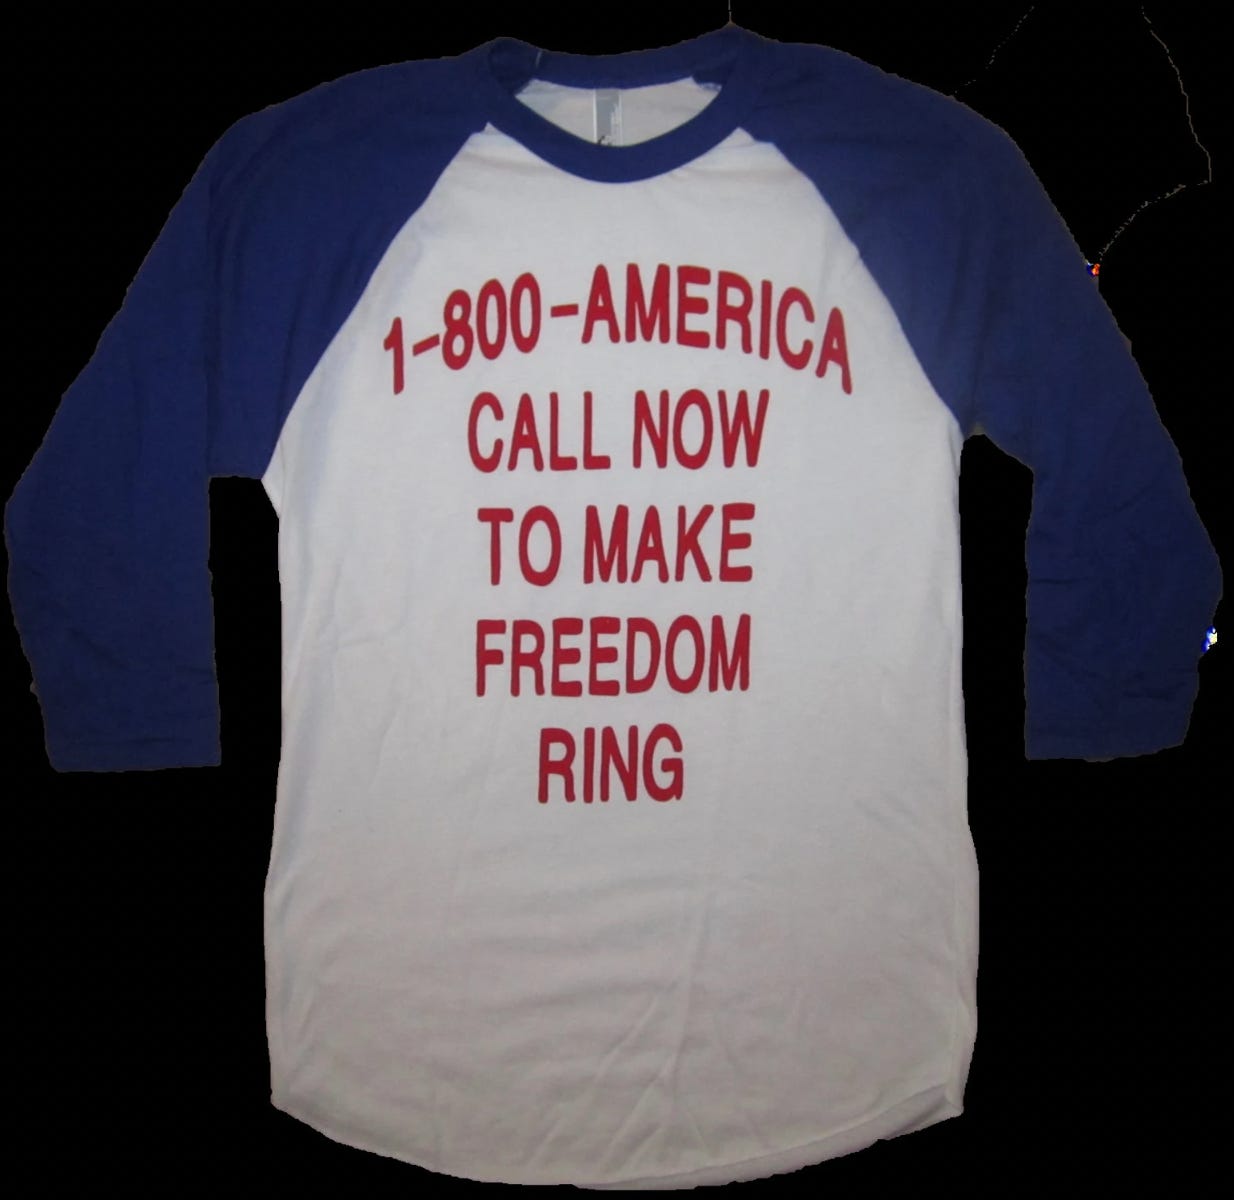 A white shirt with blue sleeves (raglan type) with the text of "Call 1-800-AMERICA to make freedom ring"